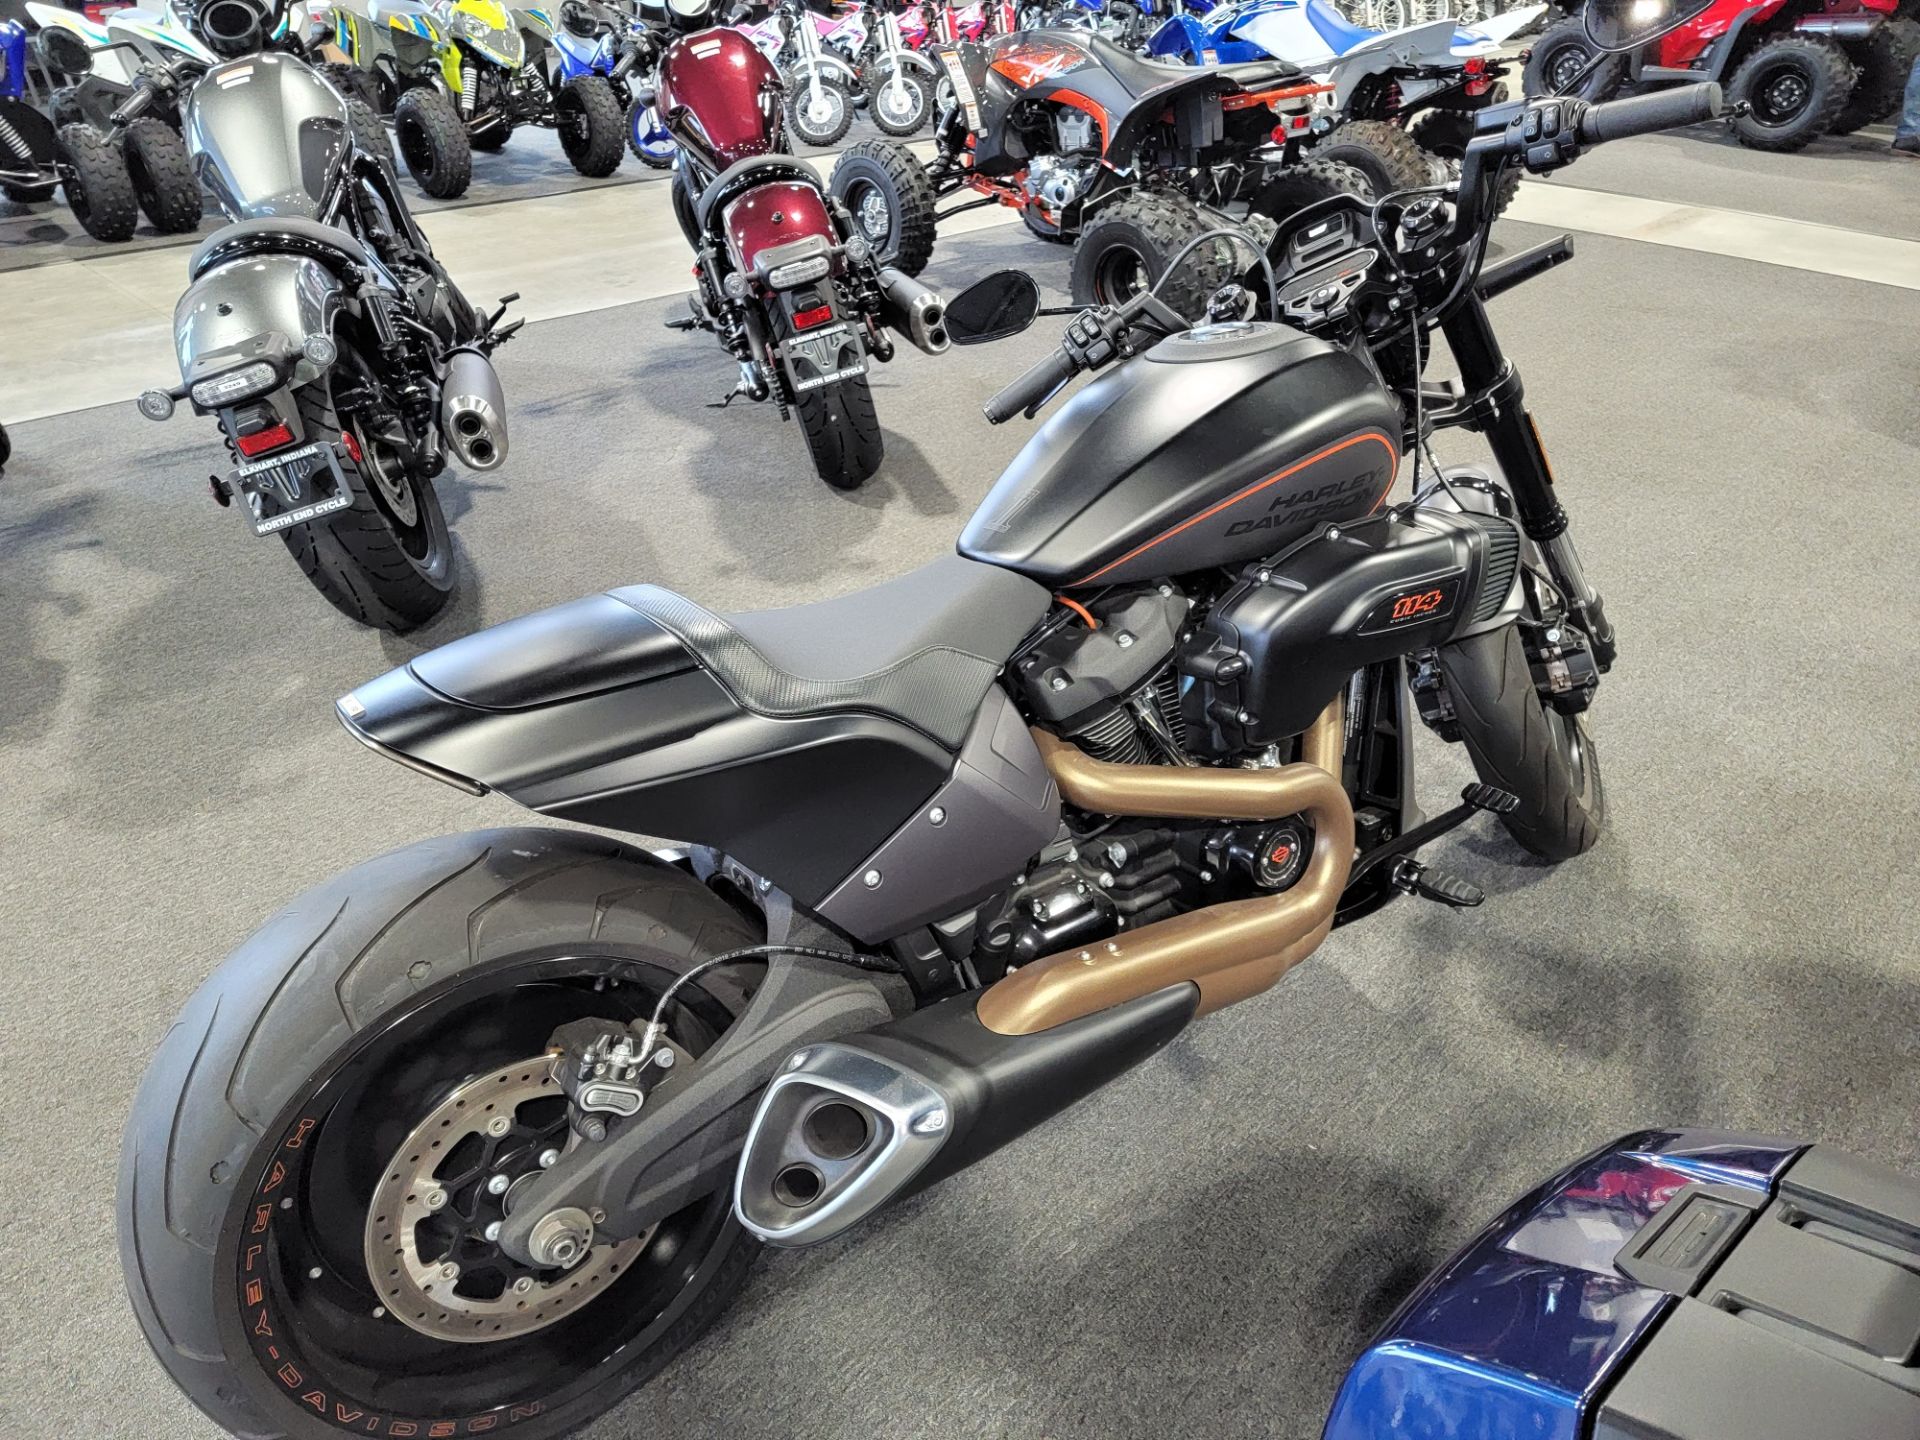 Used 2020 Harley-Davidson FXDR Motorcycles in Elkhart, IN | Stock Number:  N/A.